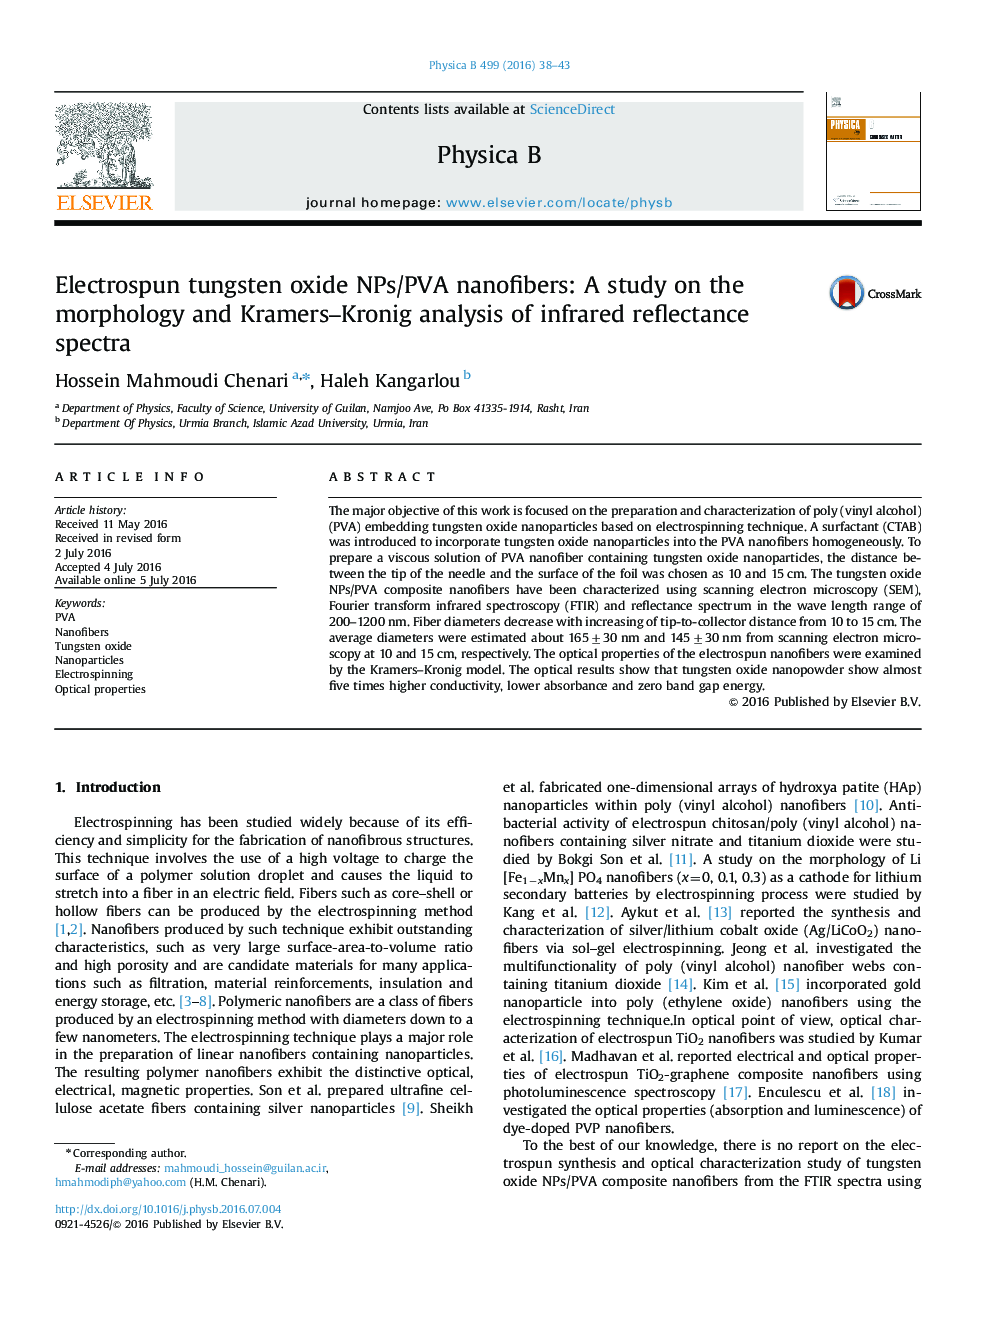 Electrospun tungsten oxide NPs/PVA nanofibers: A study on the morphology and Kramers–Kronig analysis of infrared reflectance spectra